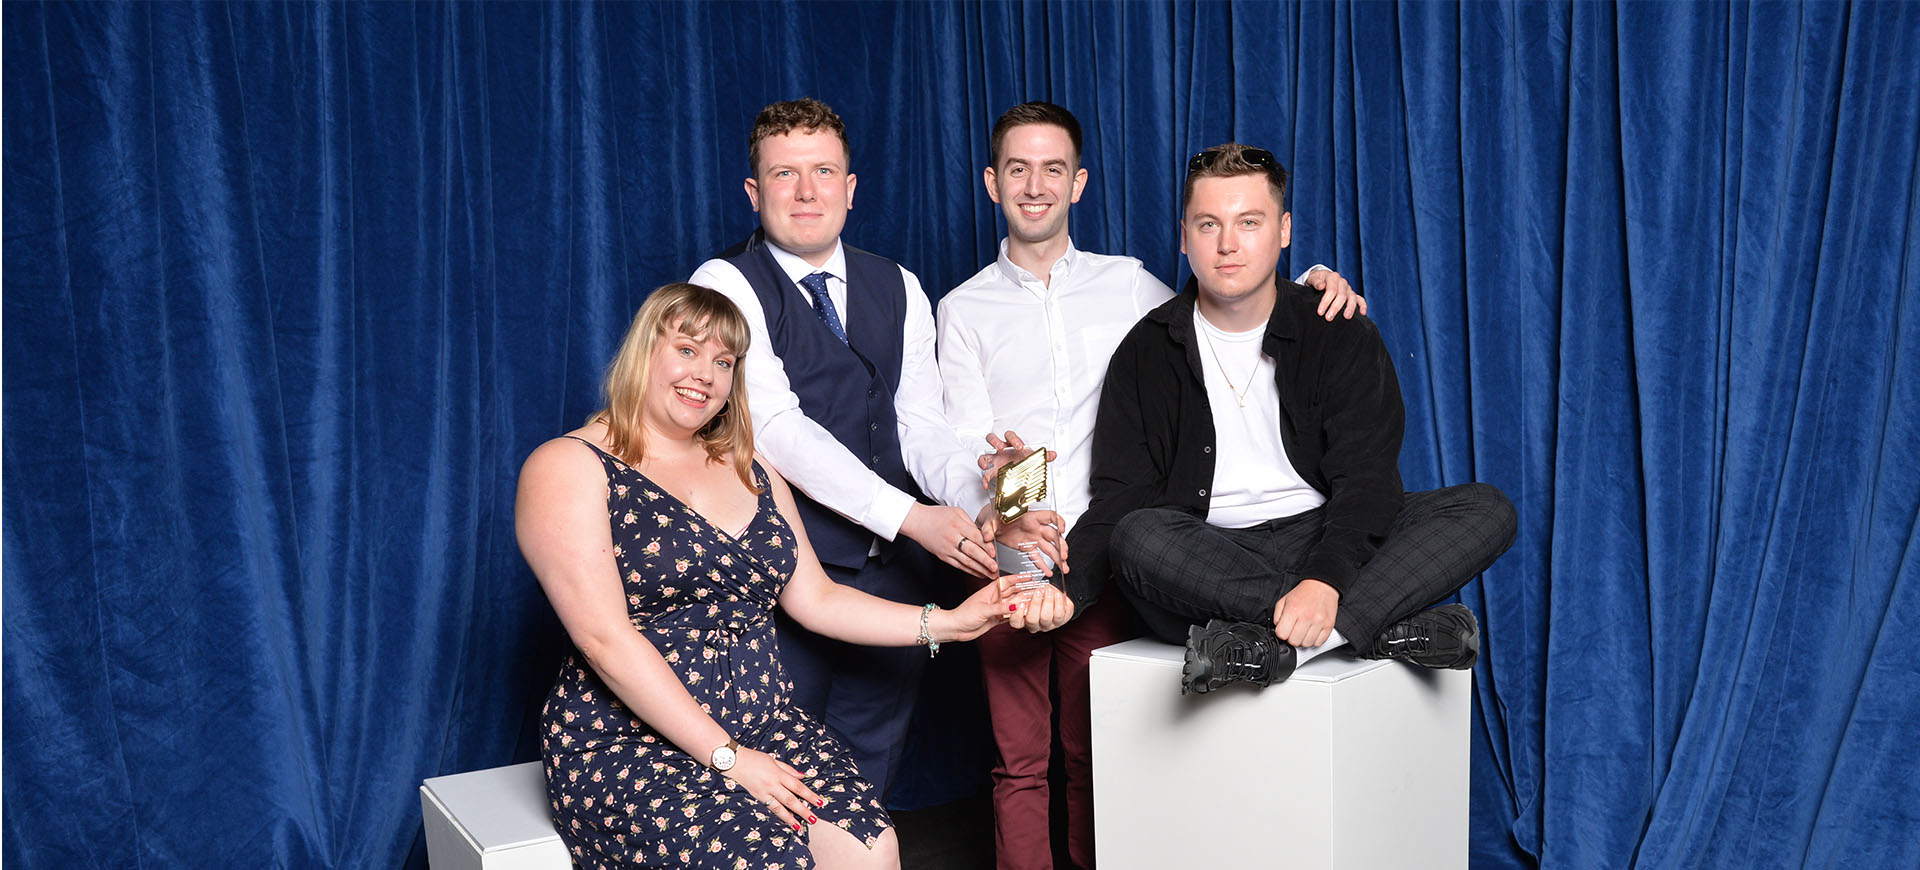 The winners of the national RTS Student Television Awards 2019